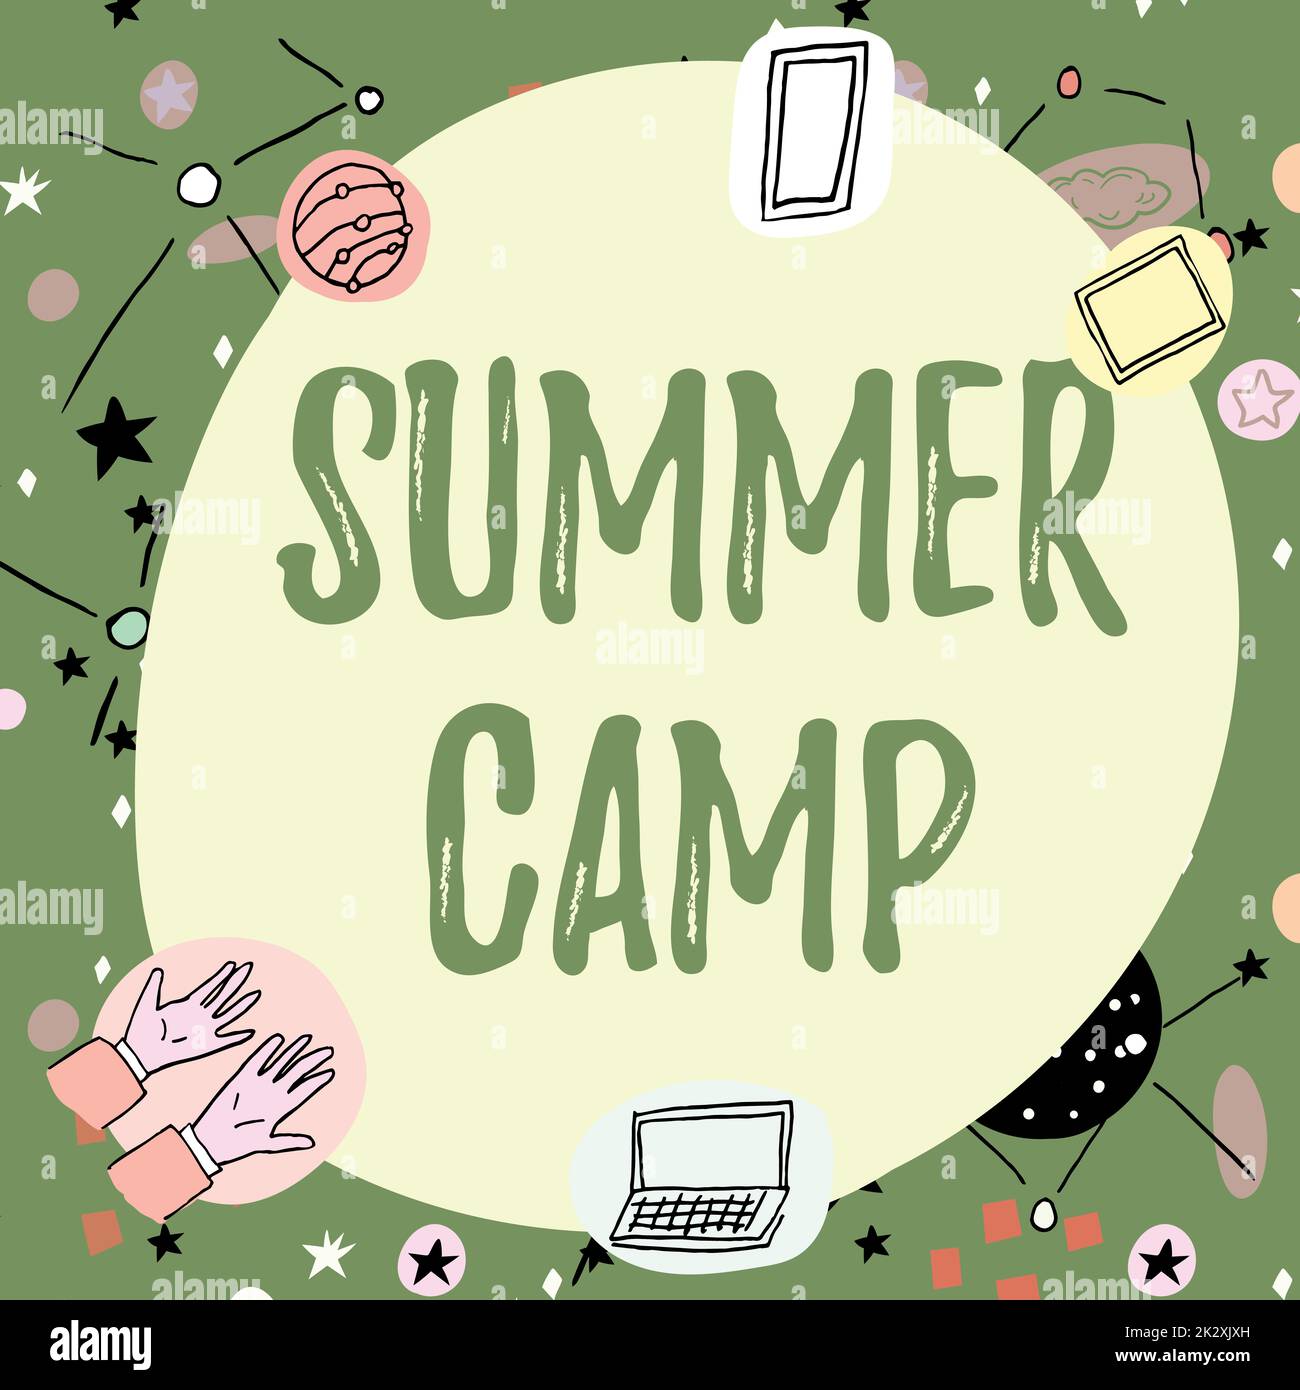 https://c8.alamy.com/comp/2K2XJXH/inspiration-showing-sign-summer-camp-internet-concept-supervised-program-for-kids-and-teenagers-during-summertime-blank-frame-decorated-with-modern-science-symbols-displaying-technology-2K2XJXH.jpg